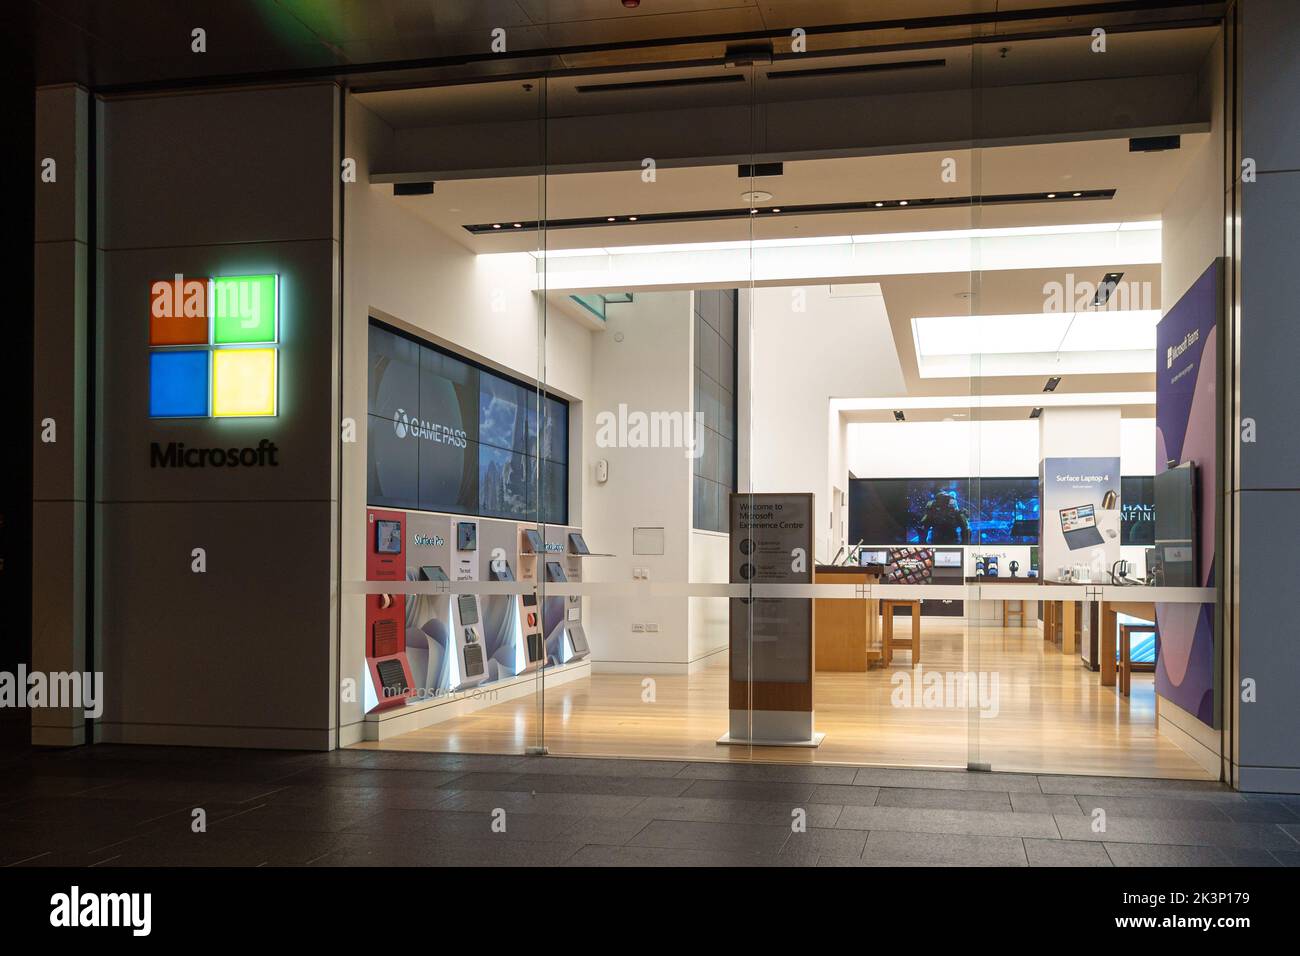 The Microsoft store on Pitt Street Mall in the Sydney Central Business District Stock Photo